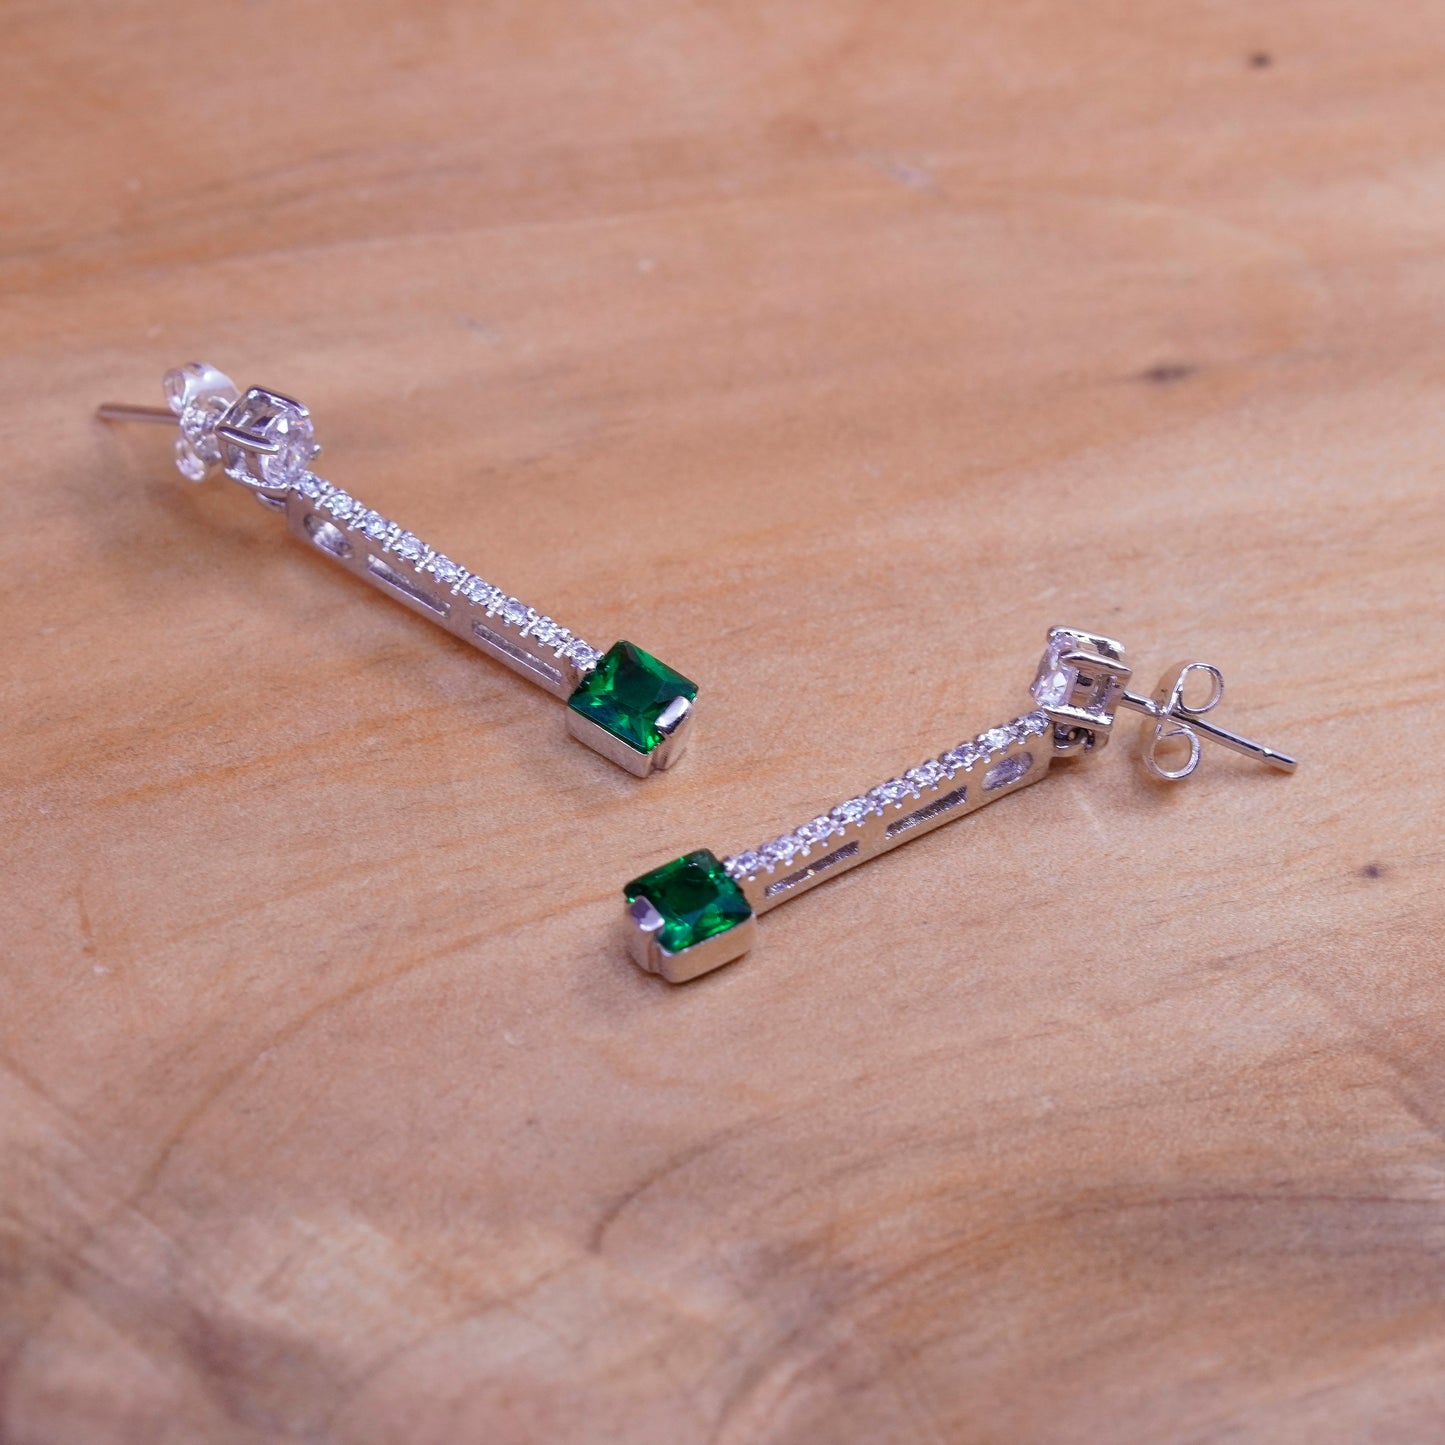 Vintage Sterling silver handmade earrings, 925 long drops with green clear CZ